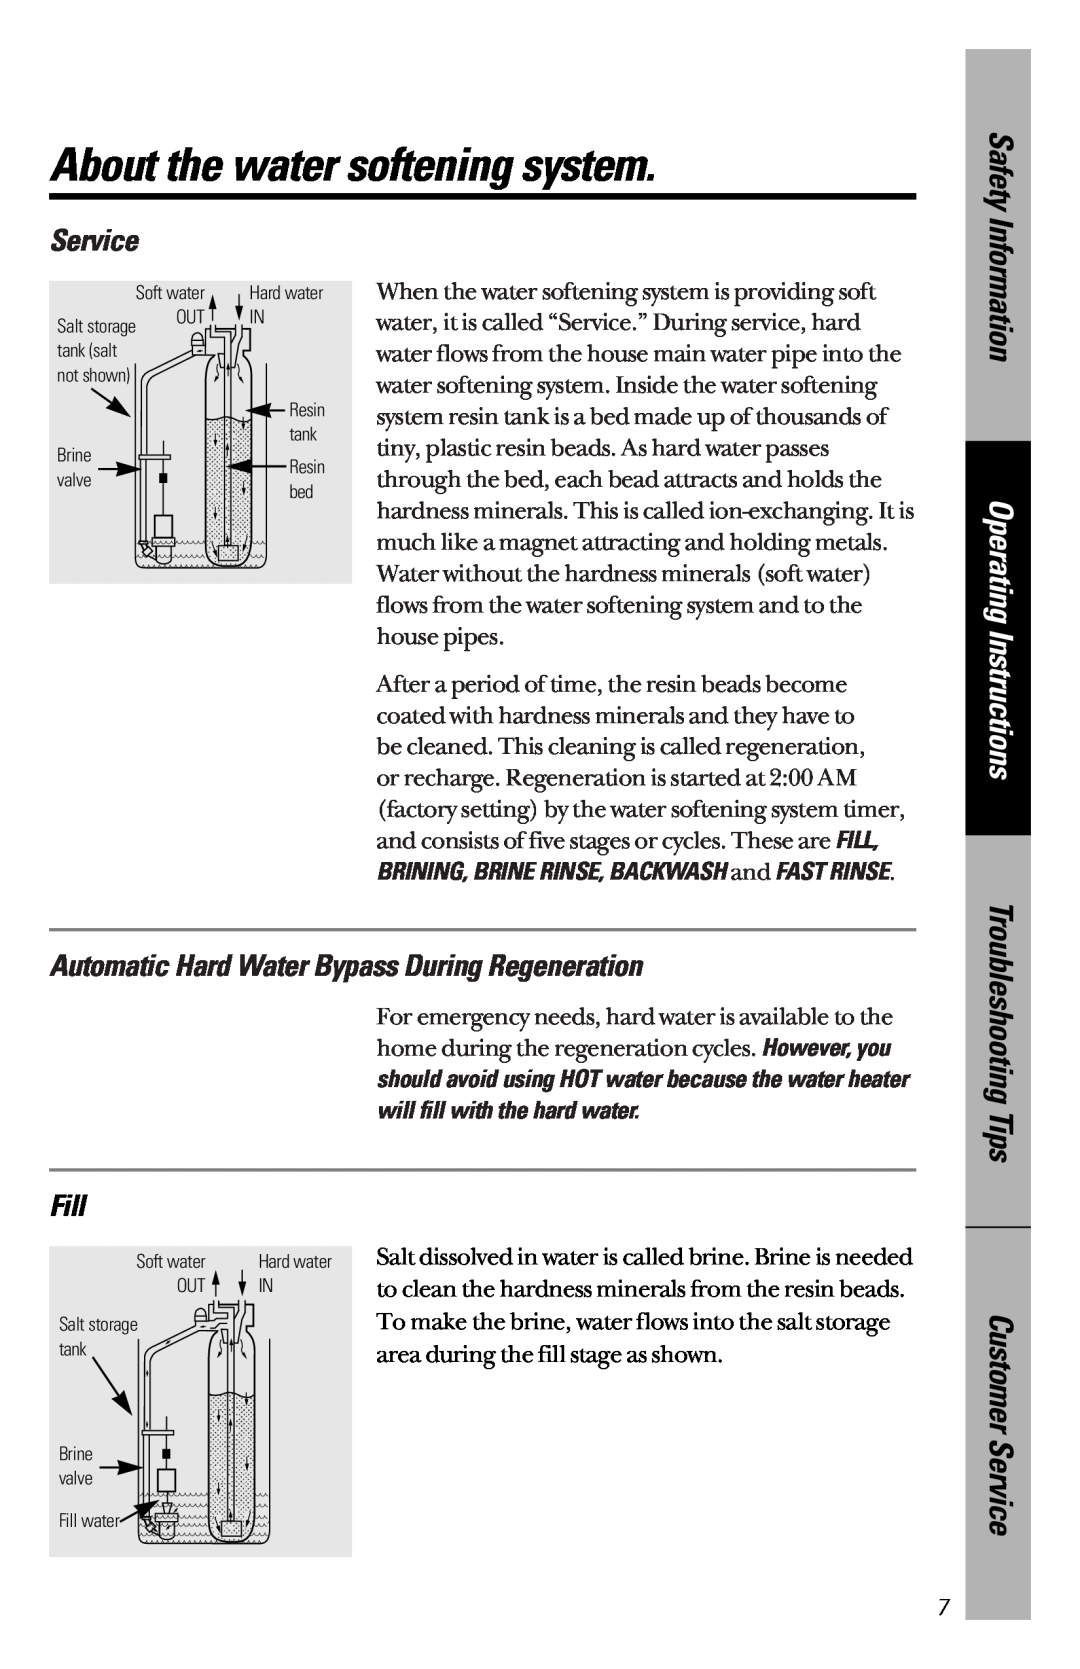 GE PNSF39Z01 owner manual About the water softening system, Information, Operating Instructions, Safety, Service, Fill 